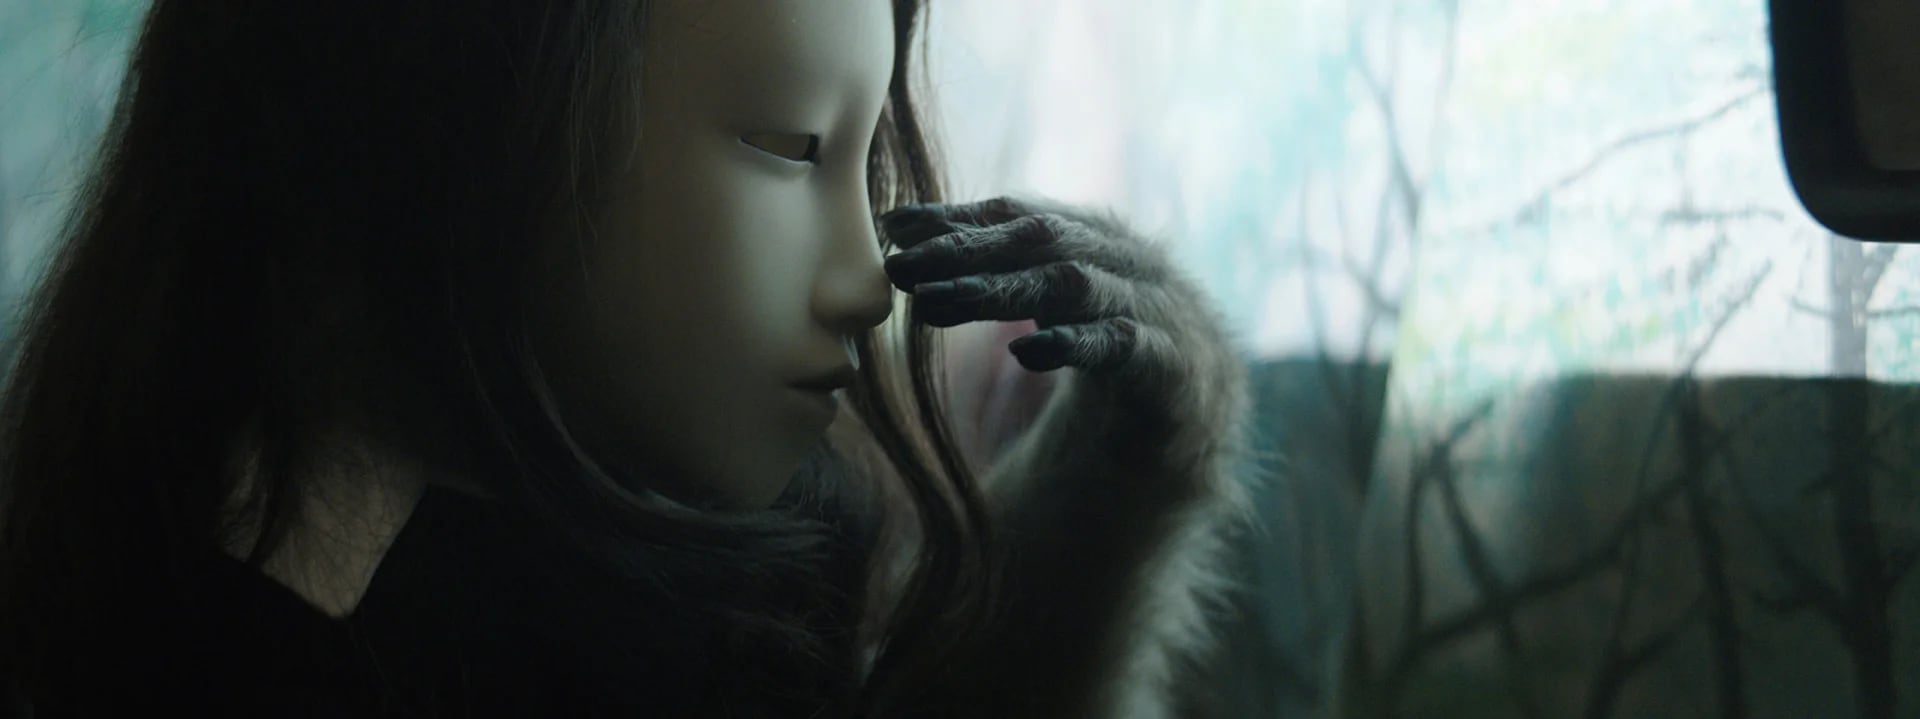 Pierre Huyghe: Untitled (Human Mask), 2014. Film, color, sound (19 minutes) Cortesia del artista; Marian Goodman Gallery, Nueva York; Hauser & Wirth, Londres; Esther Schipper, Berlín; and Anna Lena Films, París.